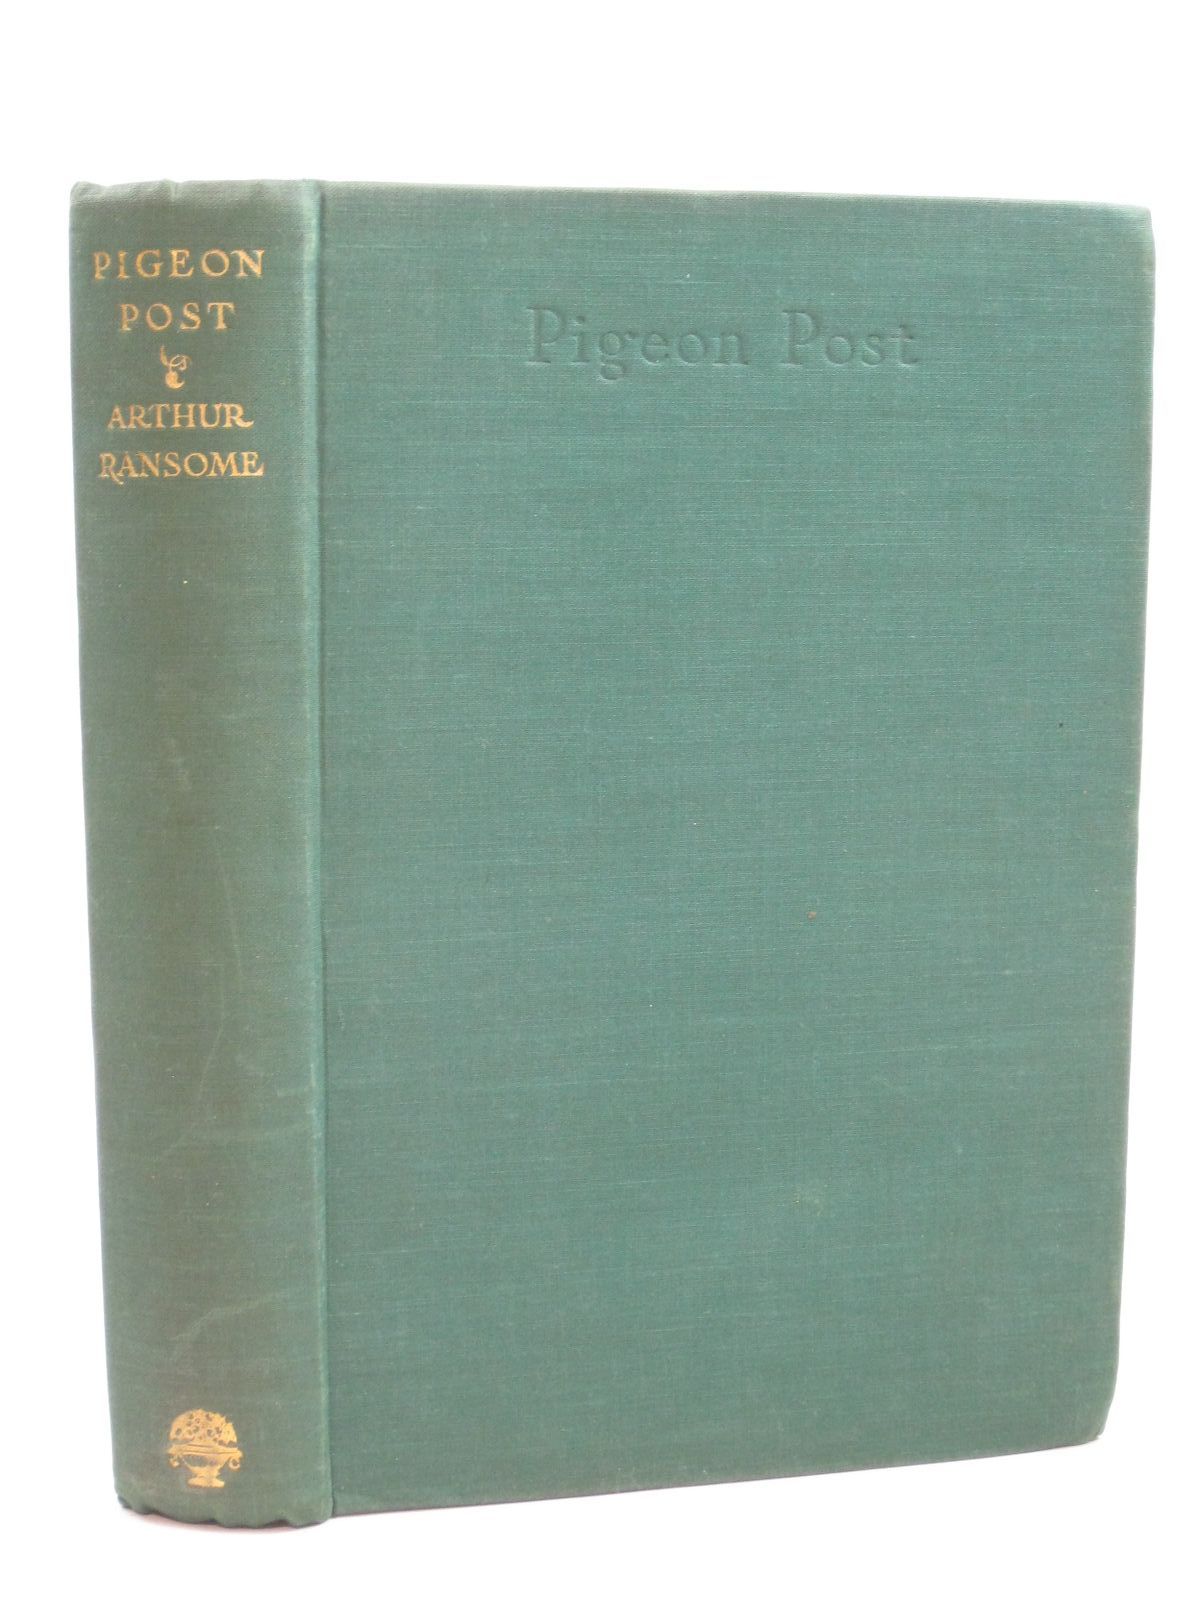 Photo of PIGEON POST written by Ransome, Arthur illustrated by Ransome, Arthur published by Jonathan Cape (STOCK CODE: 1404304)  for sale by Stella & Rose's Books